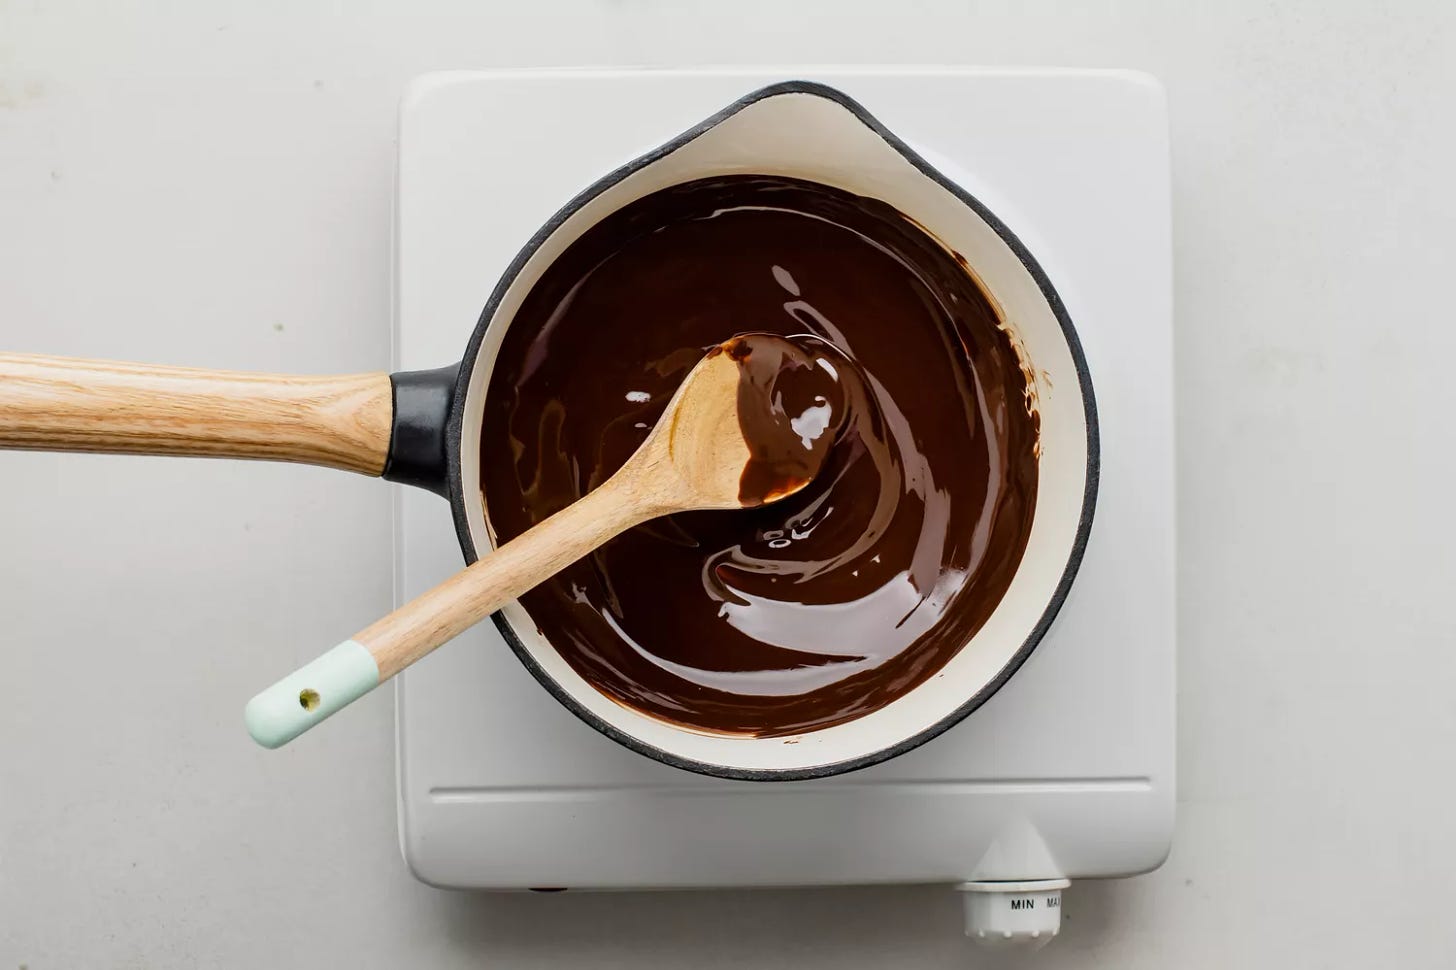 Melted butter and chocolate stirred together in a saucepan with a wooden spoon